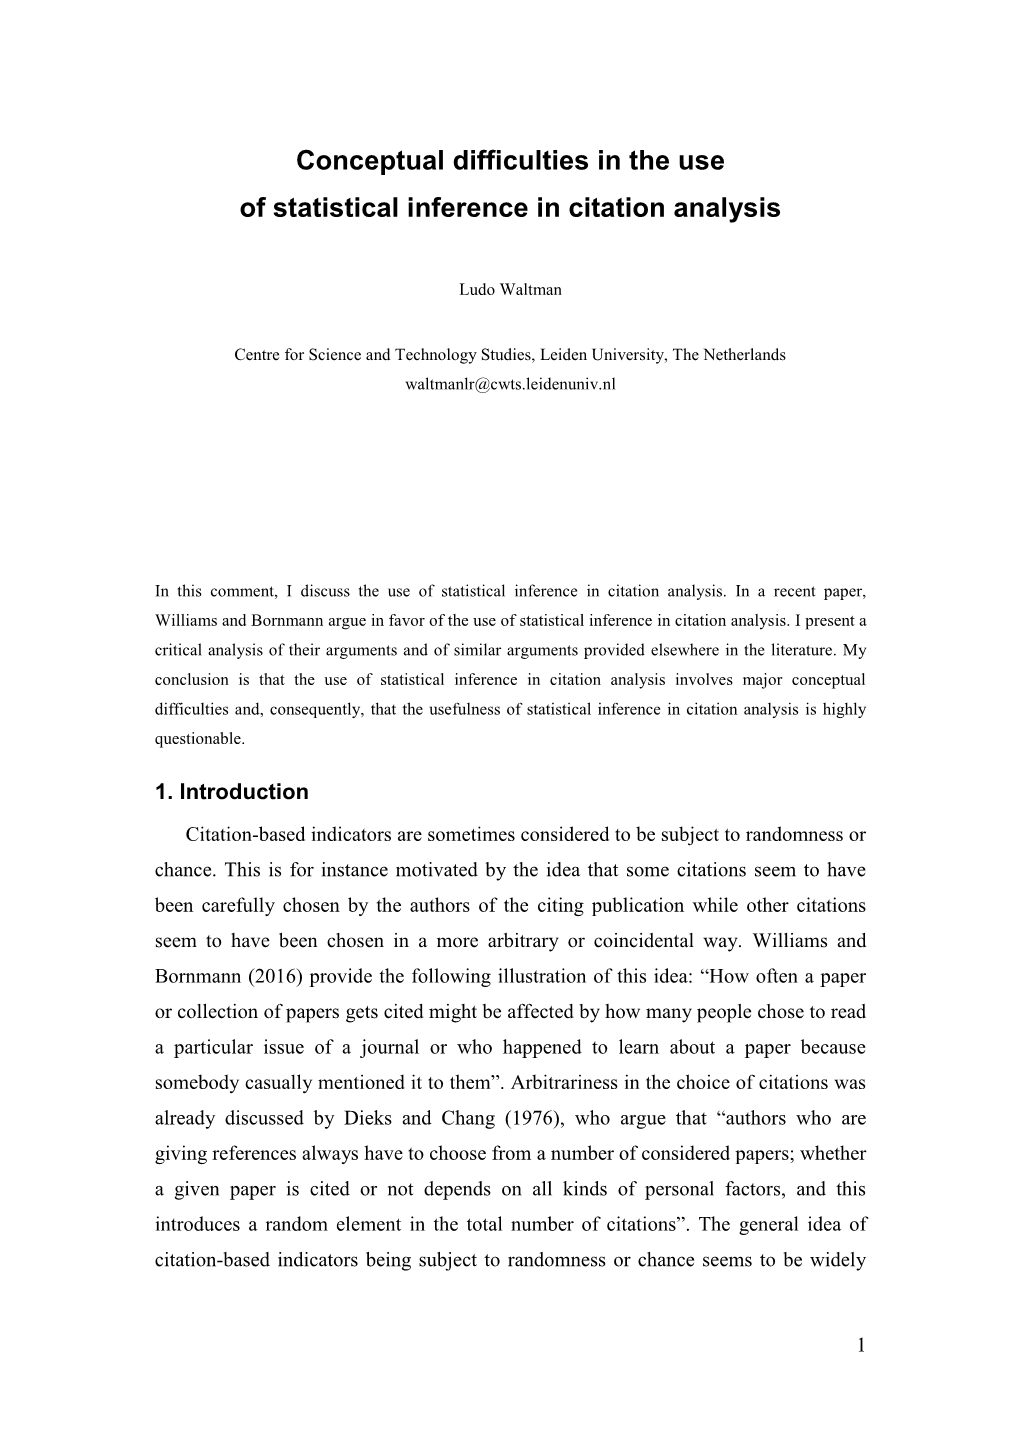 Conceptual Difficulties in the Use of Statistical Inference in Citation Analysis